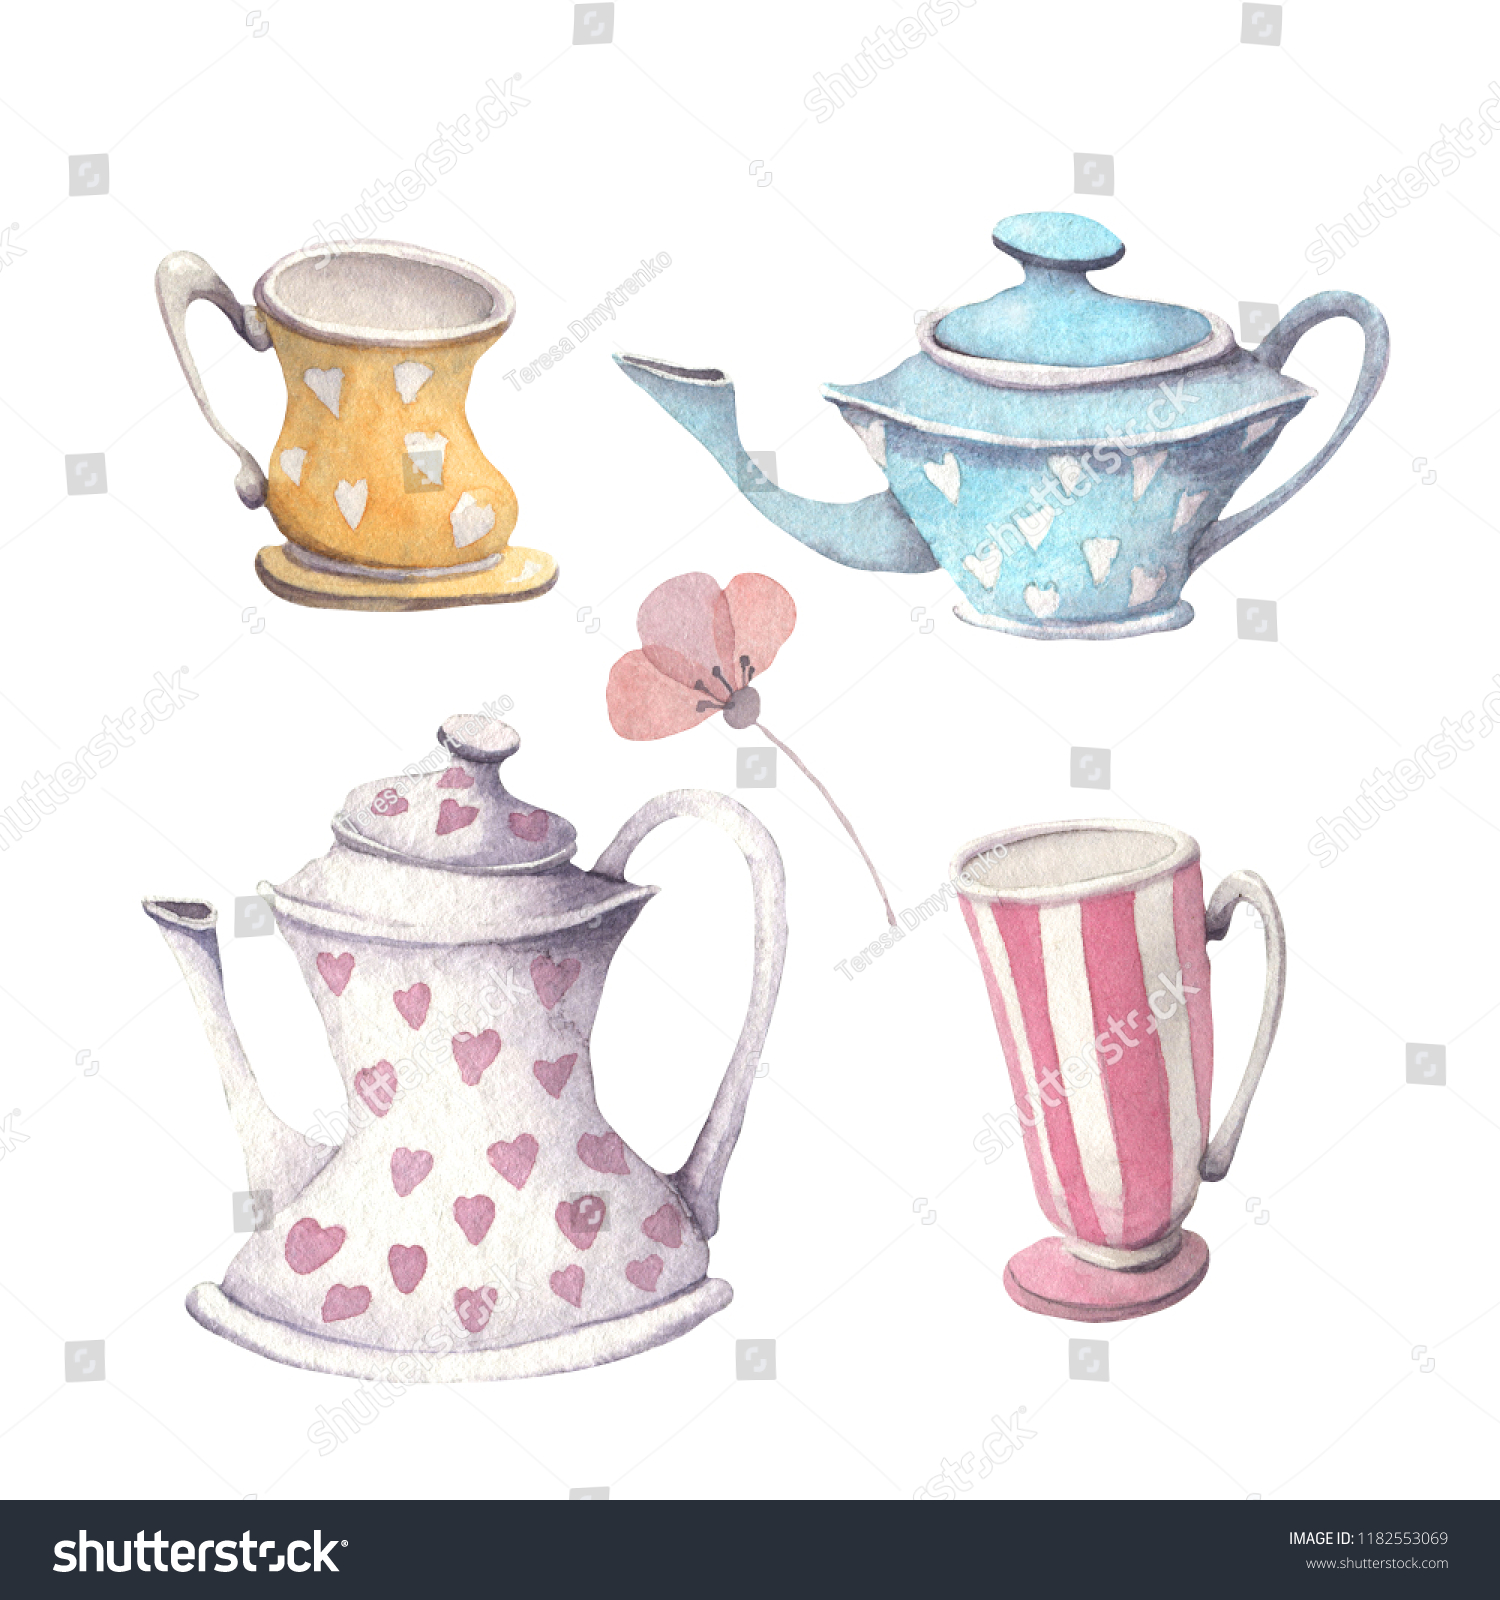 Set of teacups and teapots painted by watercolor. Hand drawn illustration. #1182553069